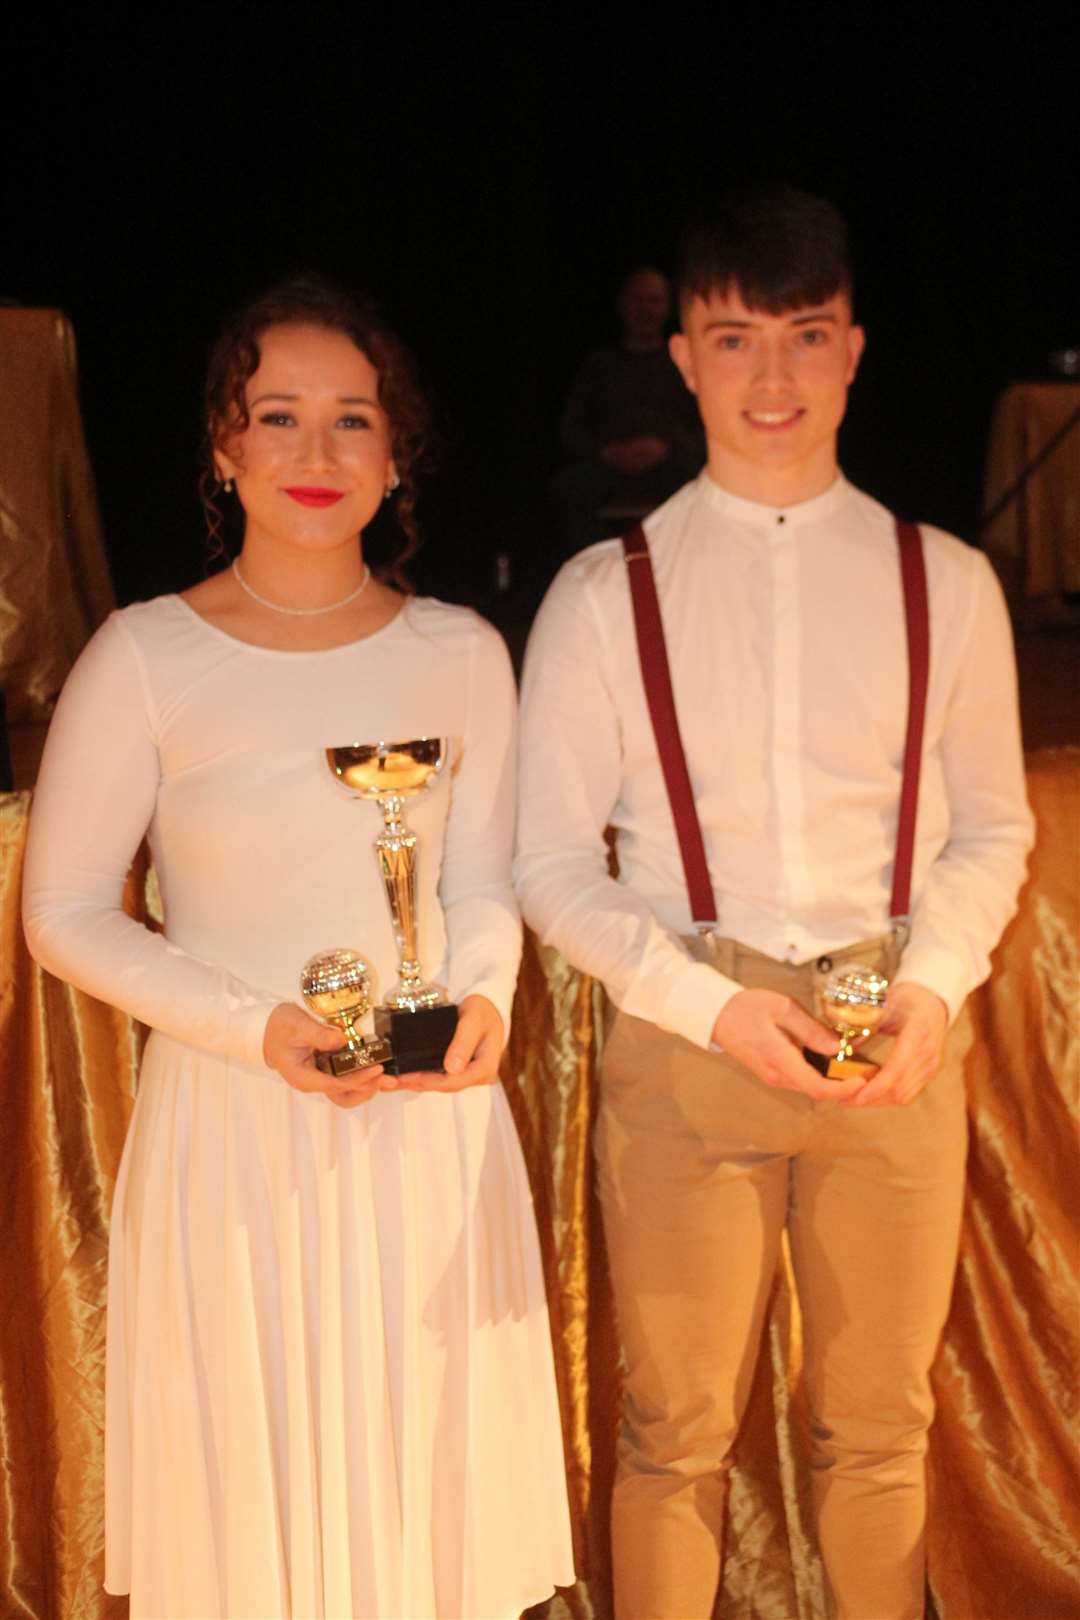 The former champions, Morven and Mark, were delighted to handover the trophies to the winners of 2022. Picture: Eswyl Fell